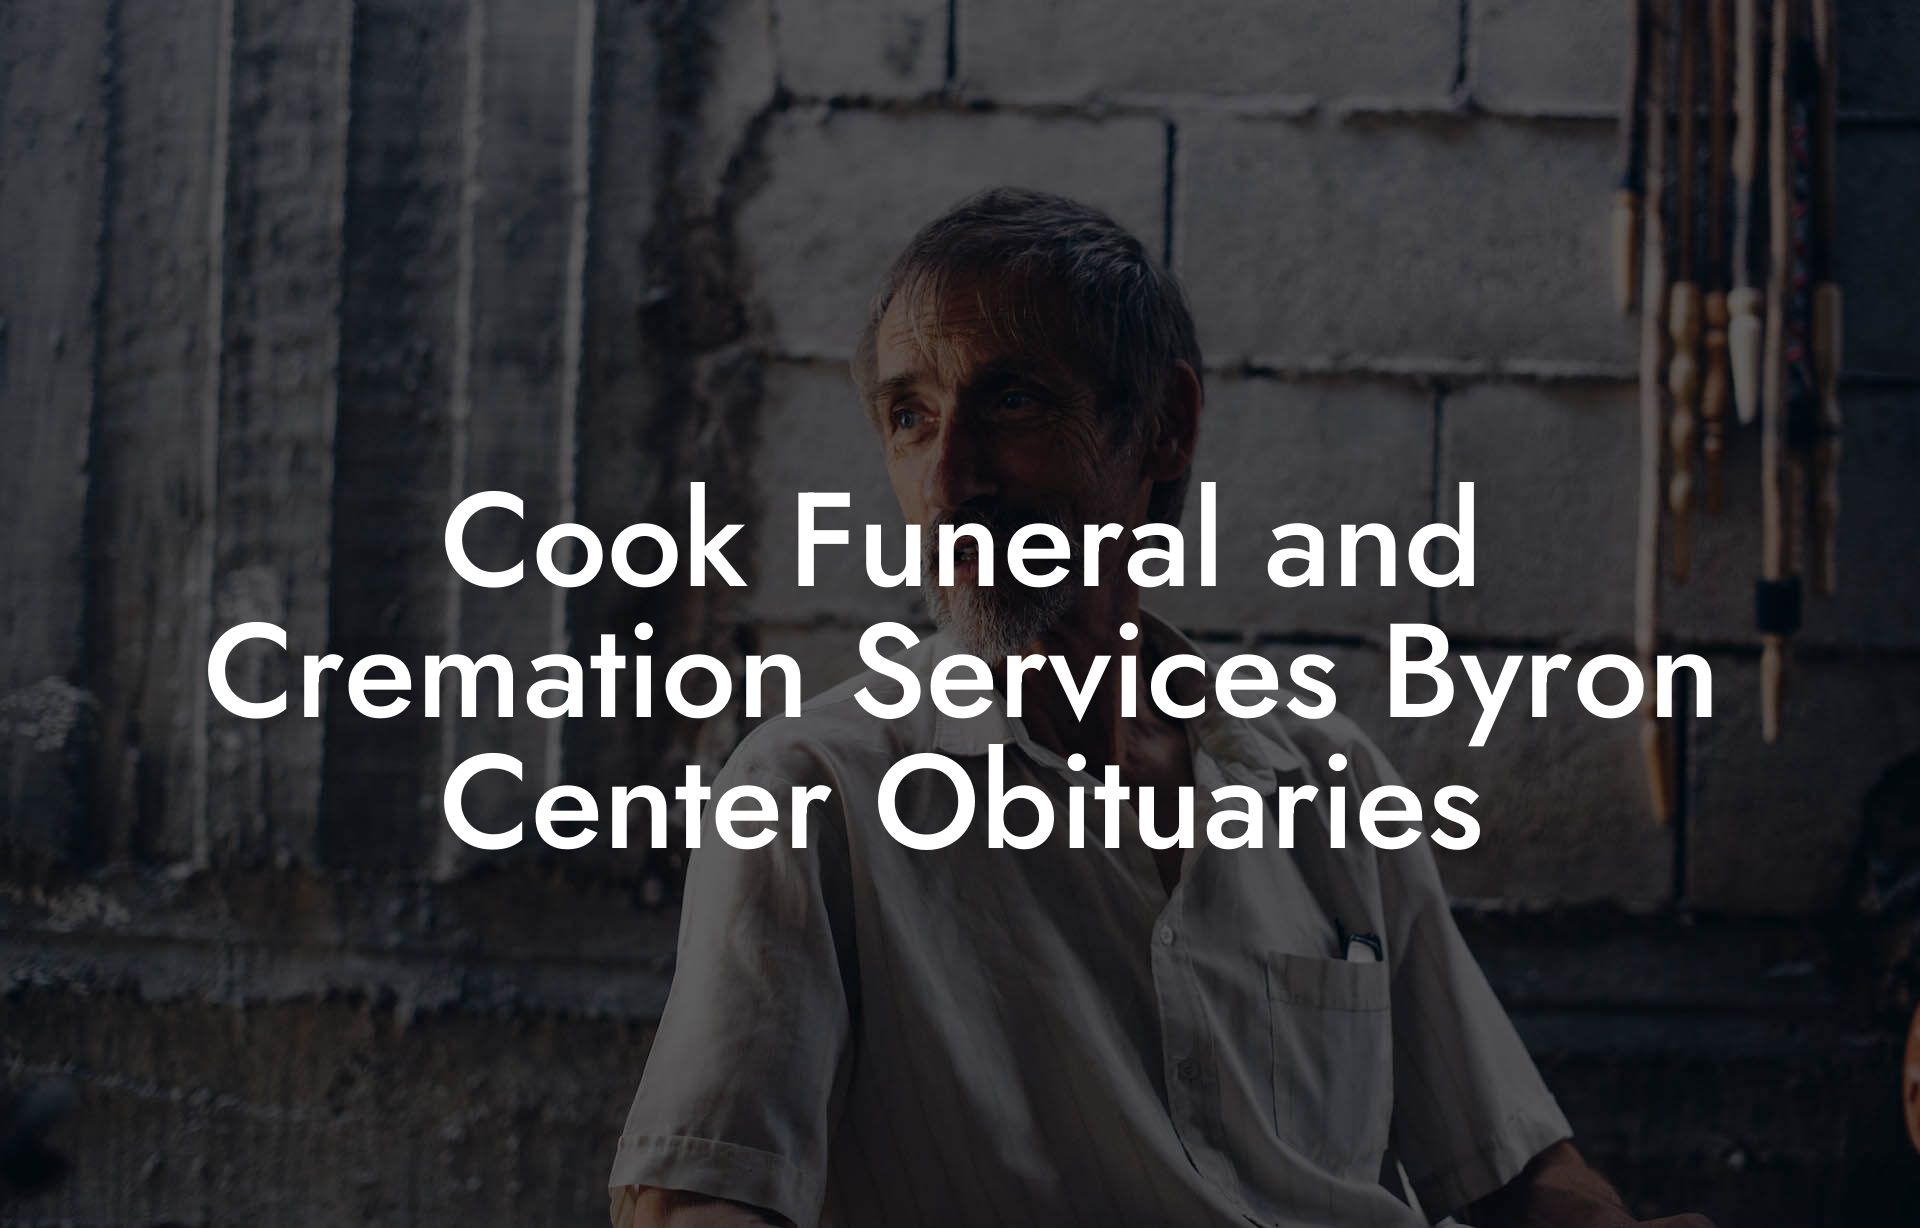 Cook Funeral and Cremation Services Byron Center Obituaries